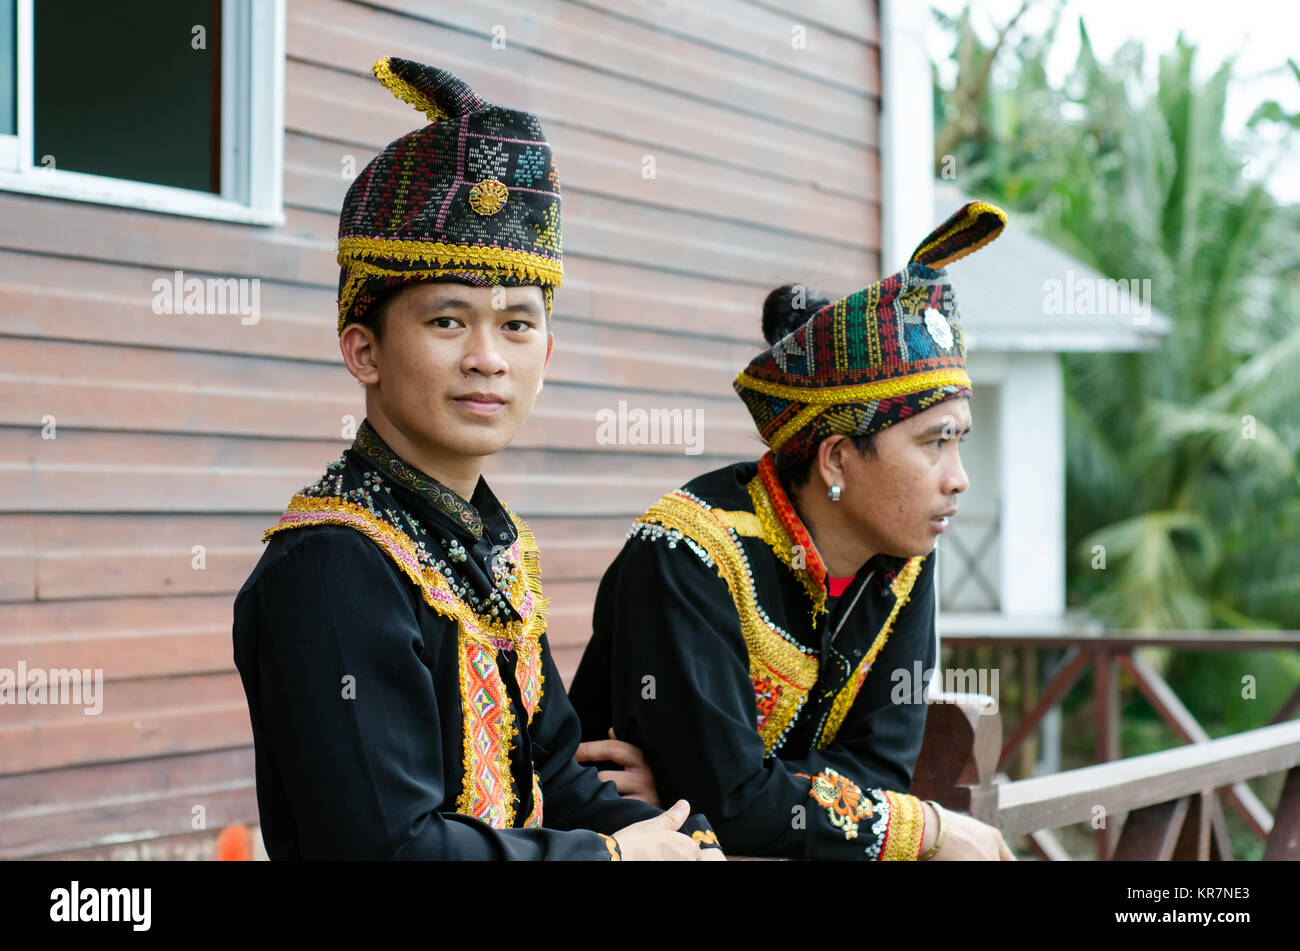 Young Men From Indigenous people of Sabah Borneo in East Malaysia in traditional attire during Musical and Dance Festival. Stock Photo